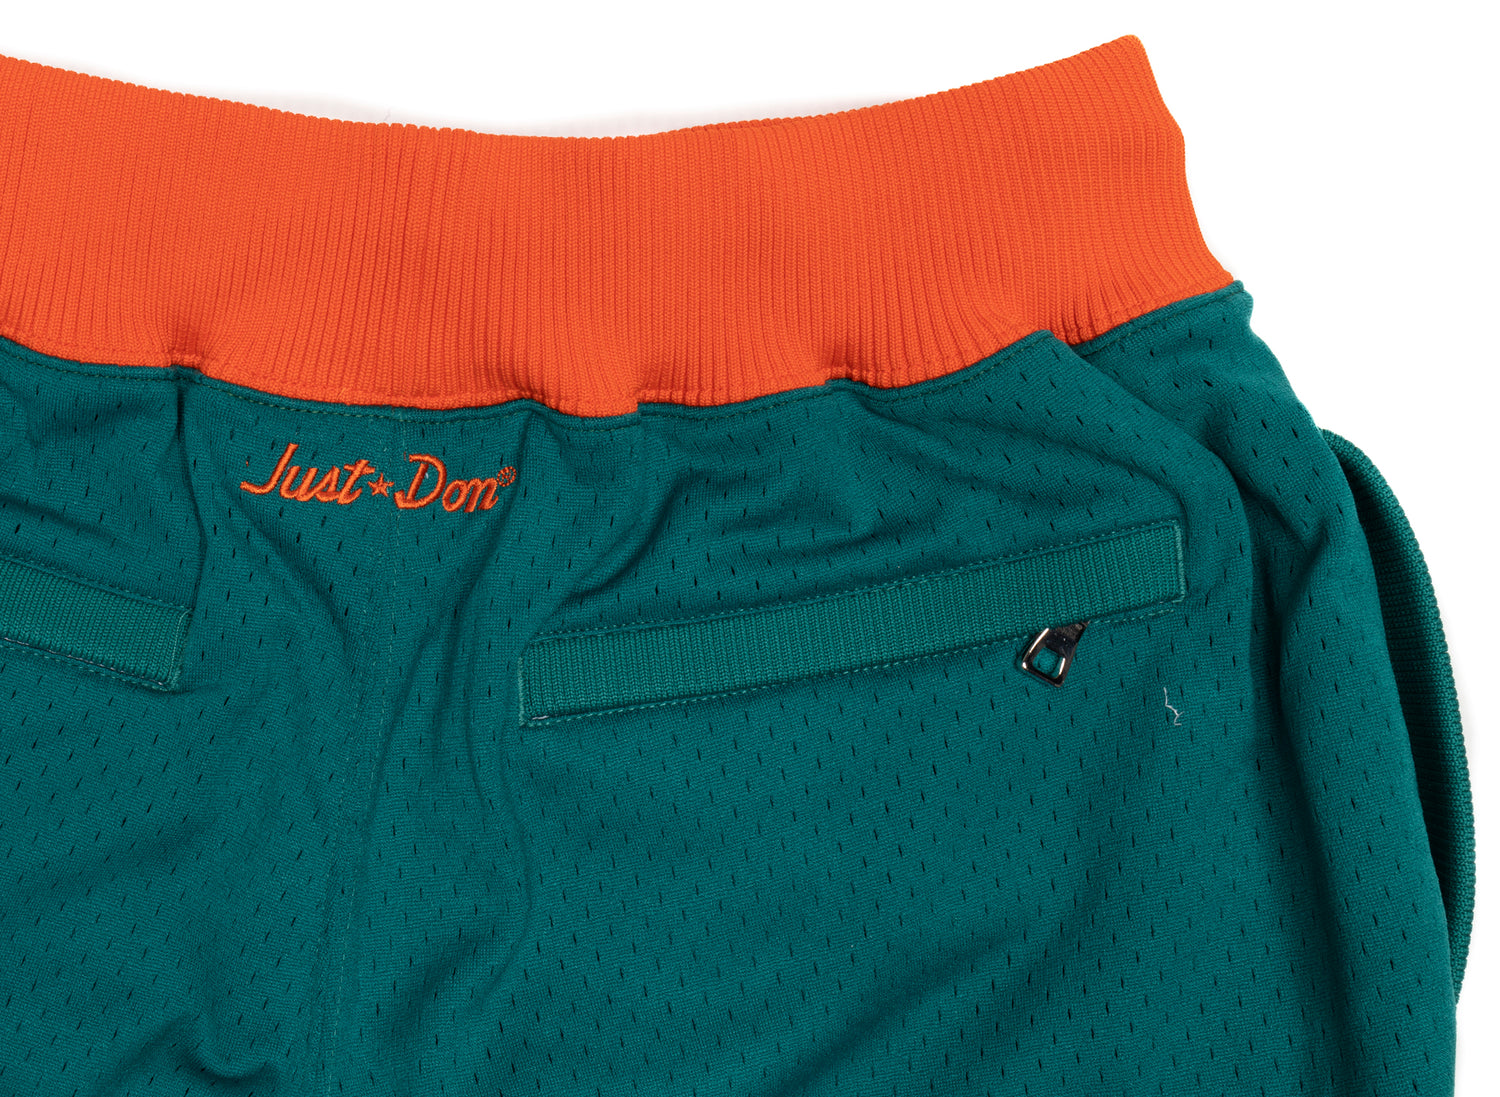 Miami Dolphins – JUST DON